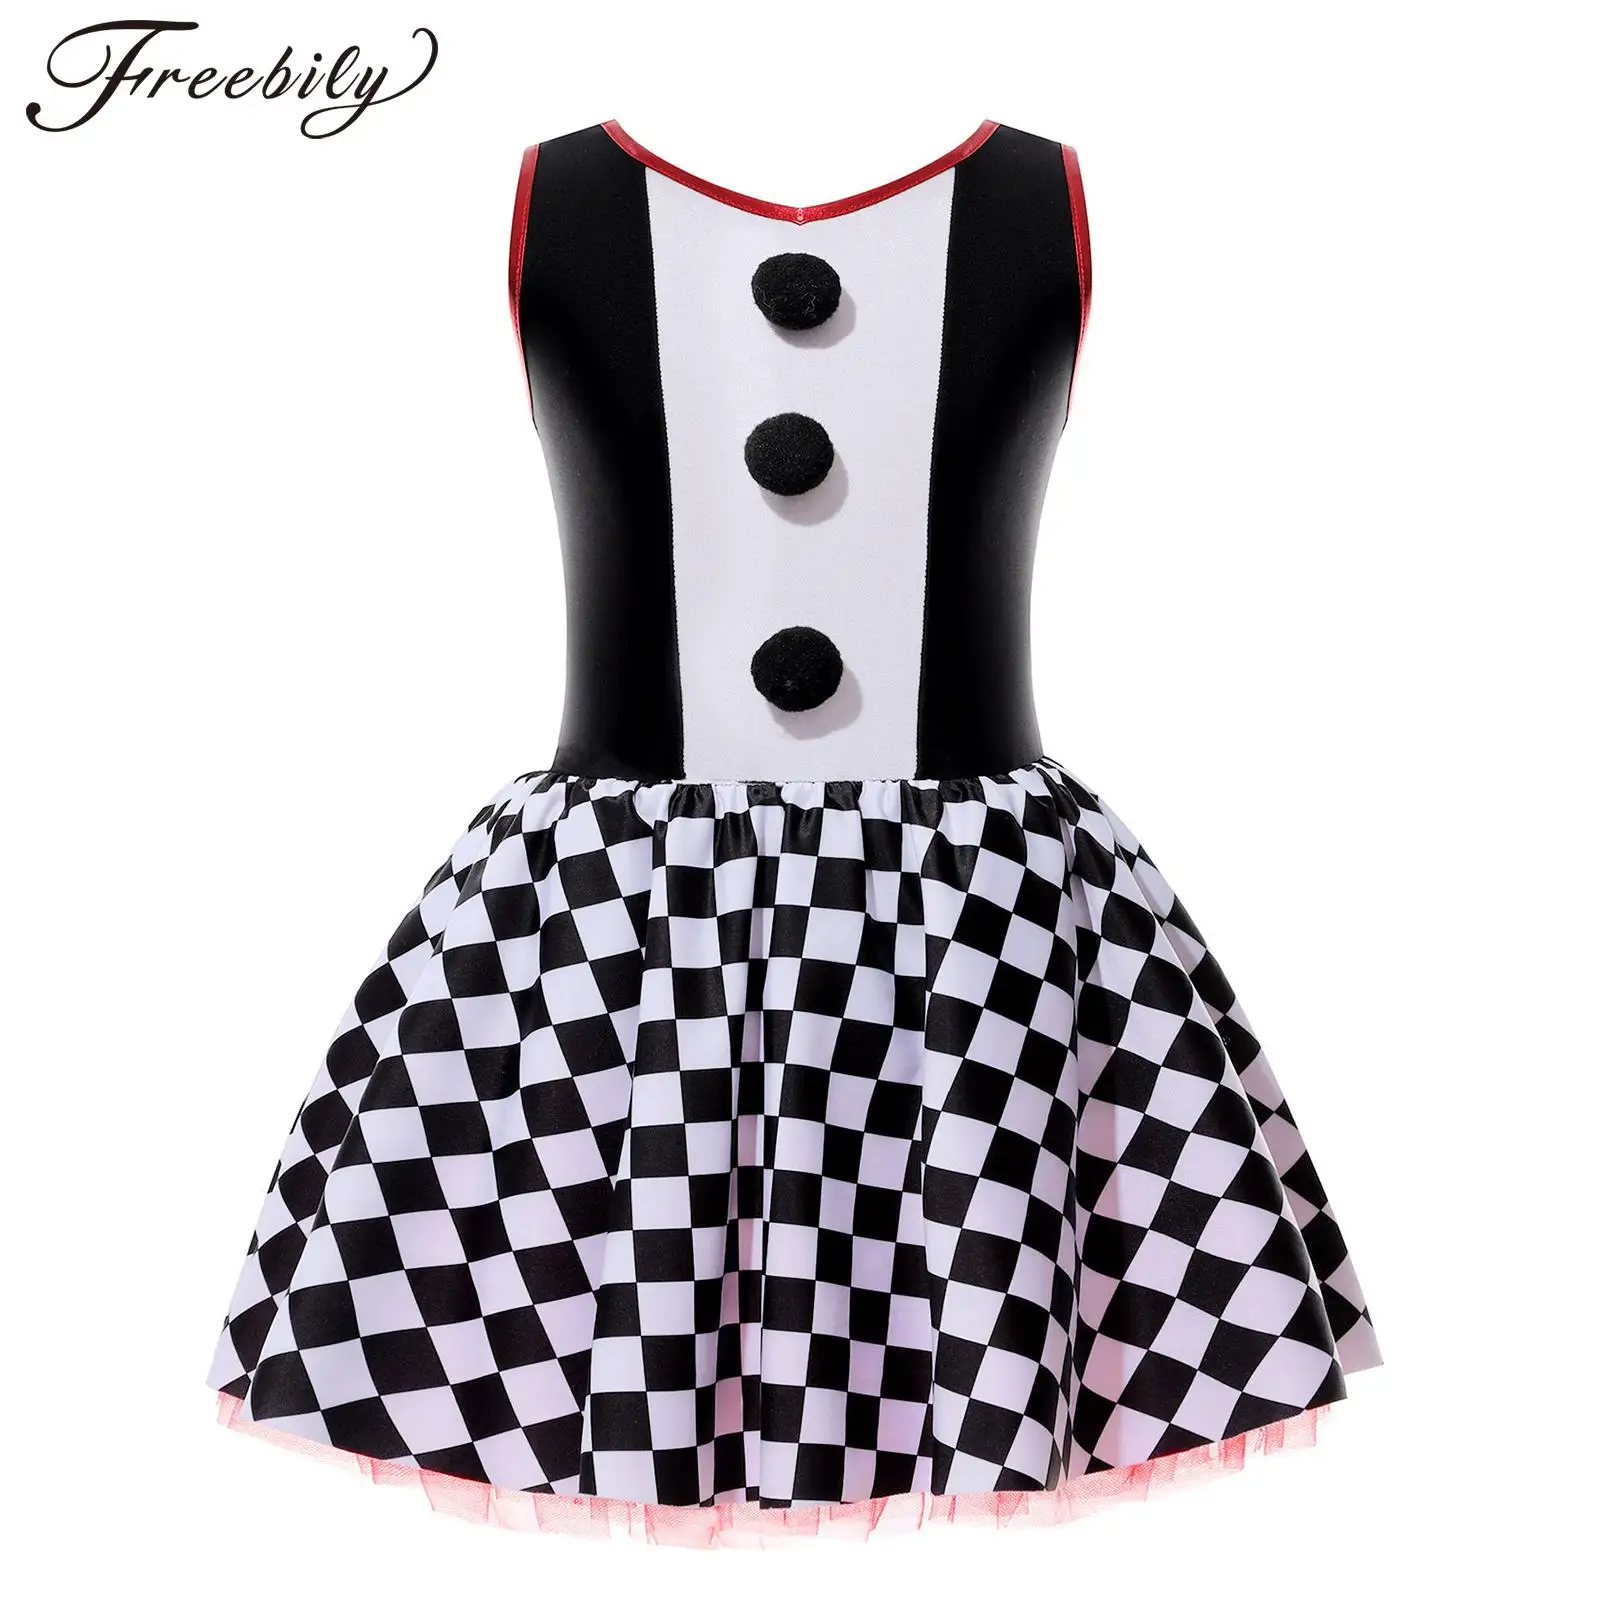 

Kids Girls Halloween Clown Cosplay Costume Sleeveless Checkerboard Print Tutu Dress for Theme Party Carnival Stage Performance